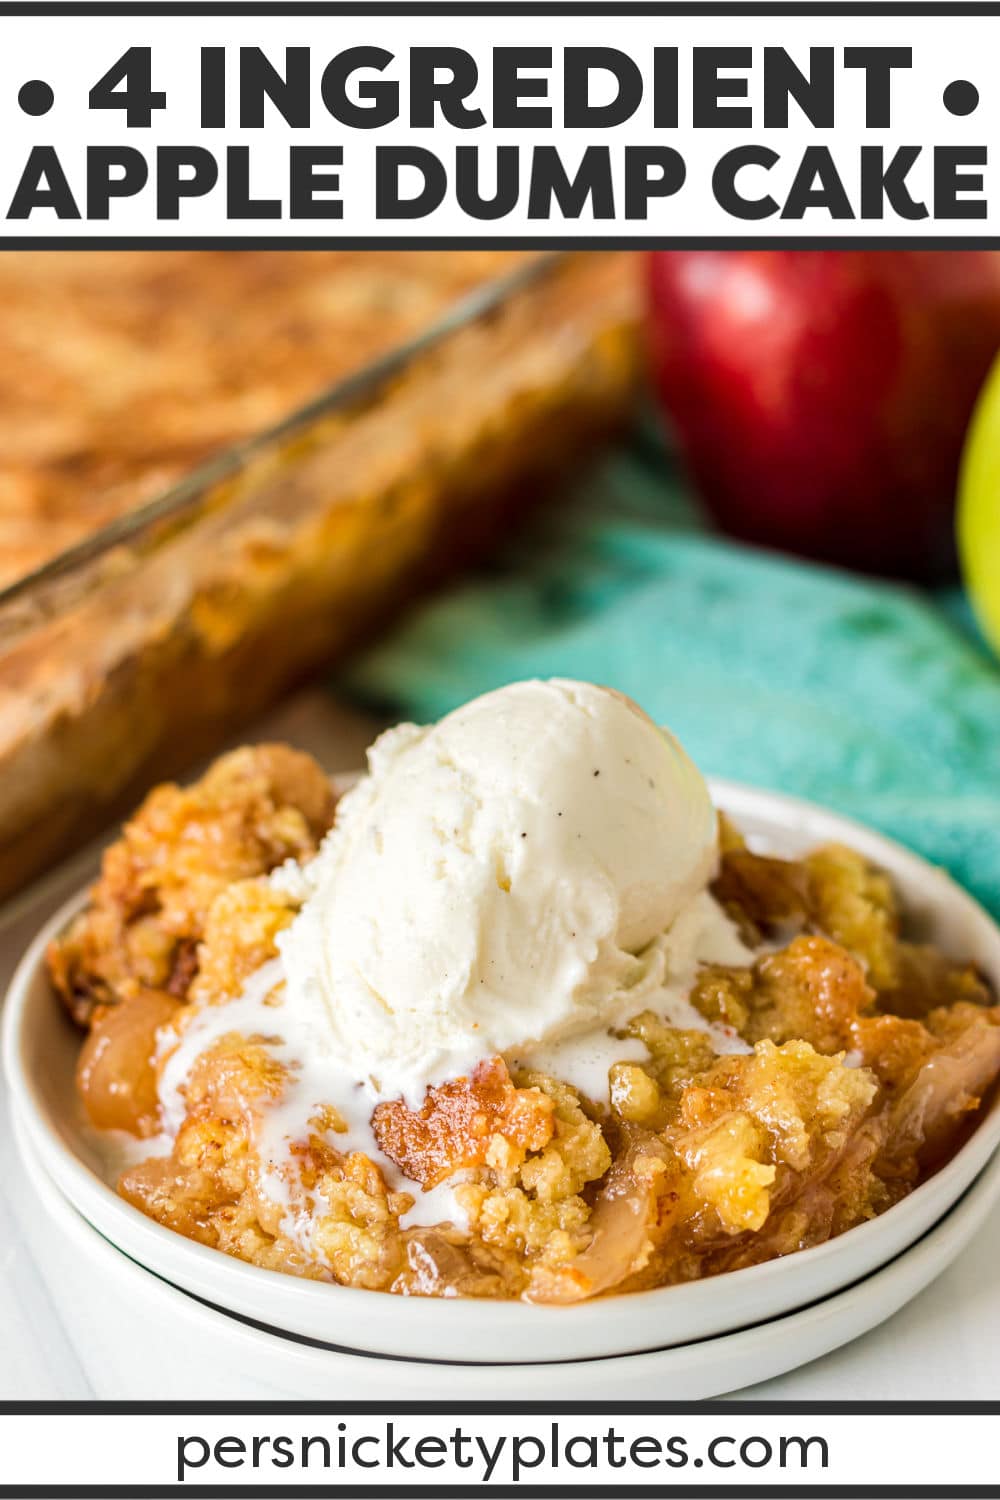 This easy 4 ingredient apple pie dump cake is made with a boxed cake mix, apple pie filling, butter, and cinnamon. It's a deconstructed (some might say lazy) version of a classic apple pie, including all of the traditional apple cinnamon flavors, but without the work of having to prepare a pie crust! | www.persnicketyplates.com